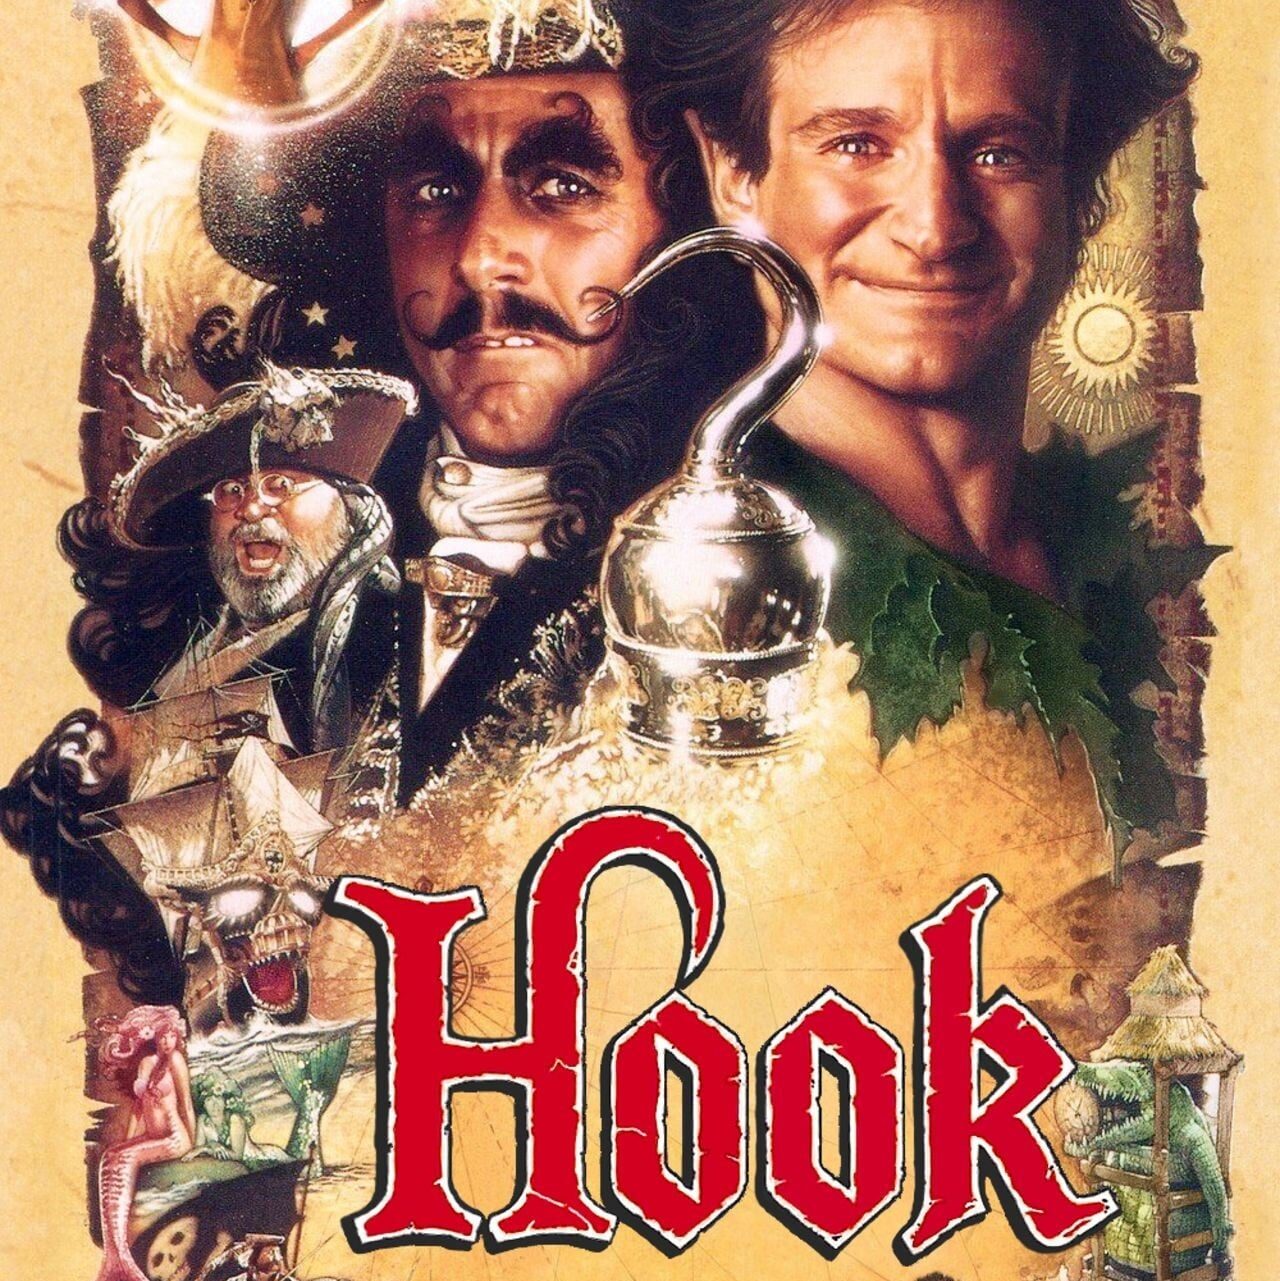 Hook (1991) - Shat the Movies